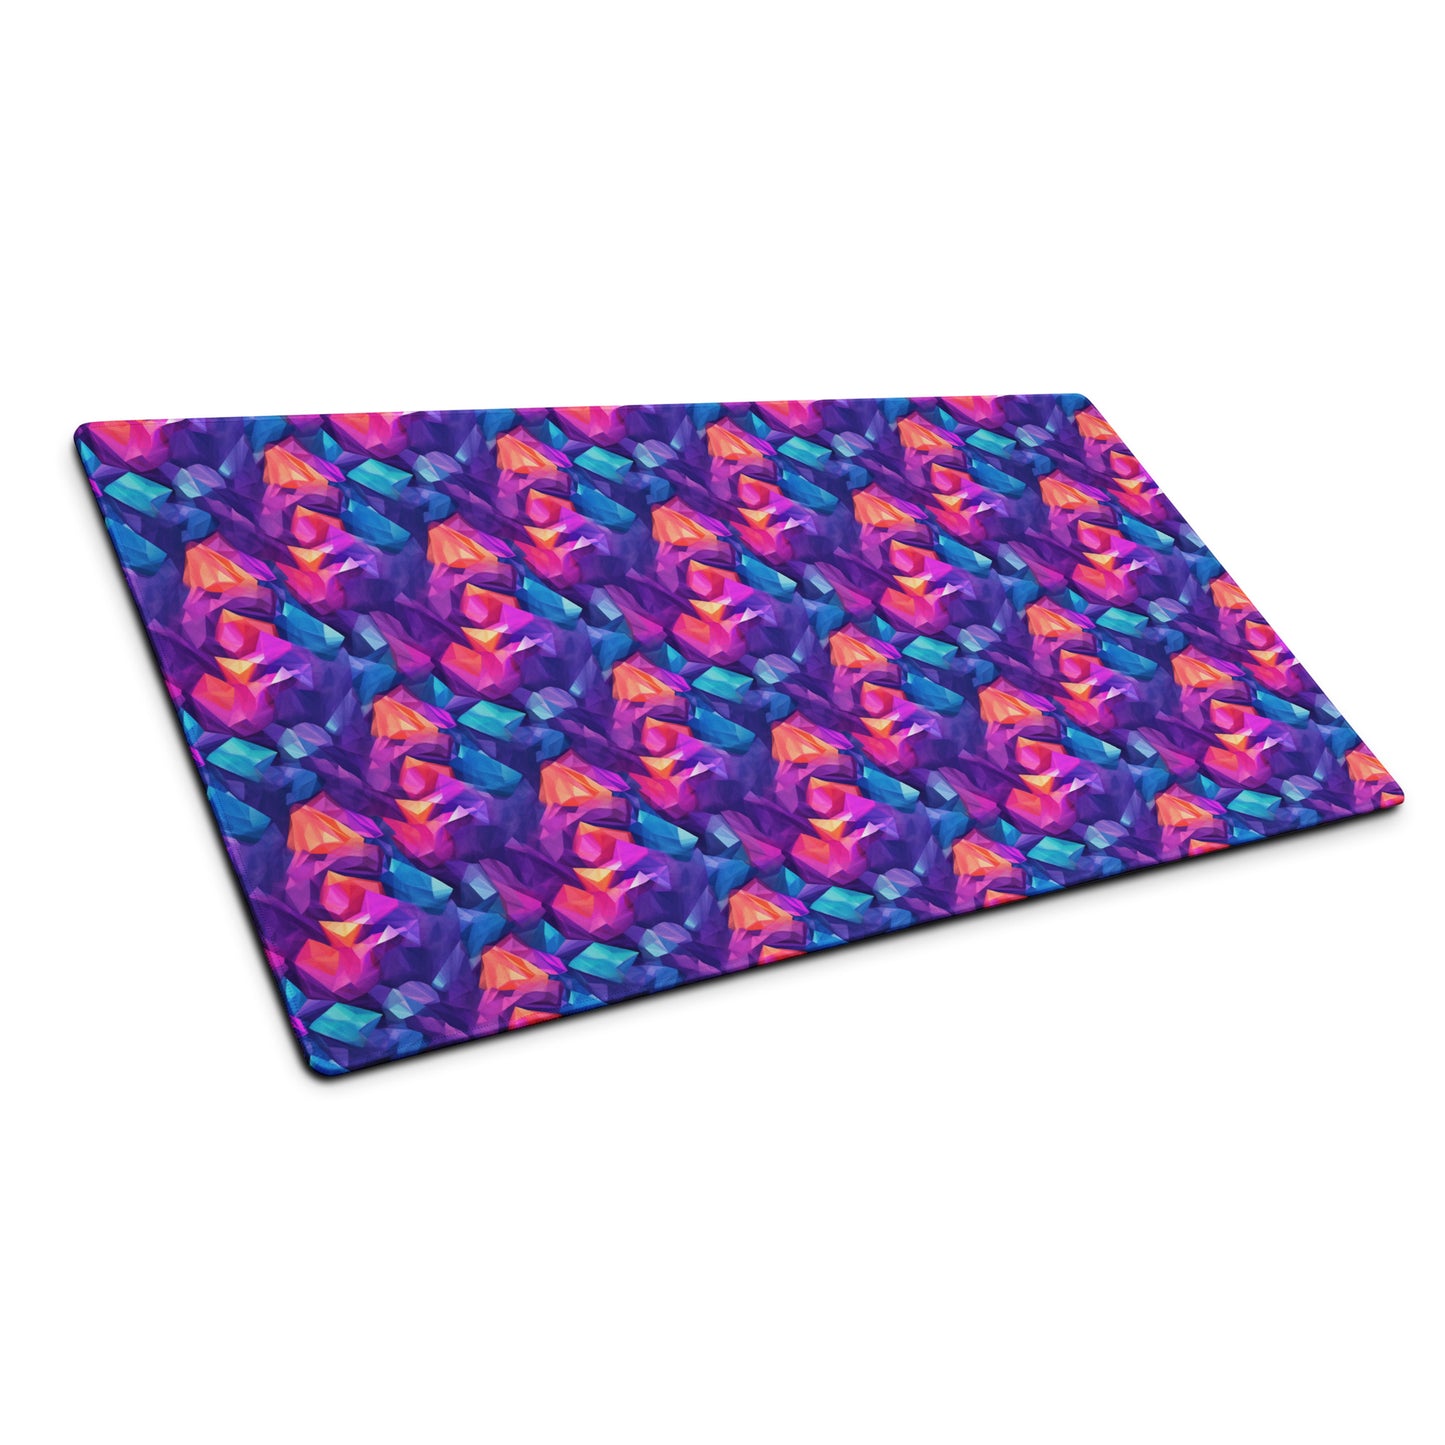 A 36" x 18" gaming desk pad with blue, purple, and orange crystals sitting at an angle.